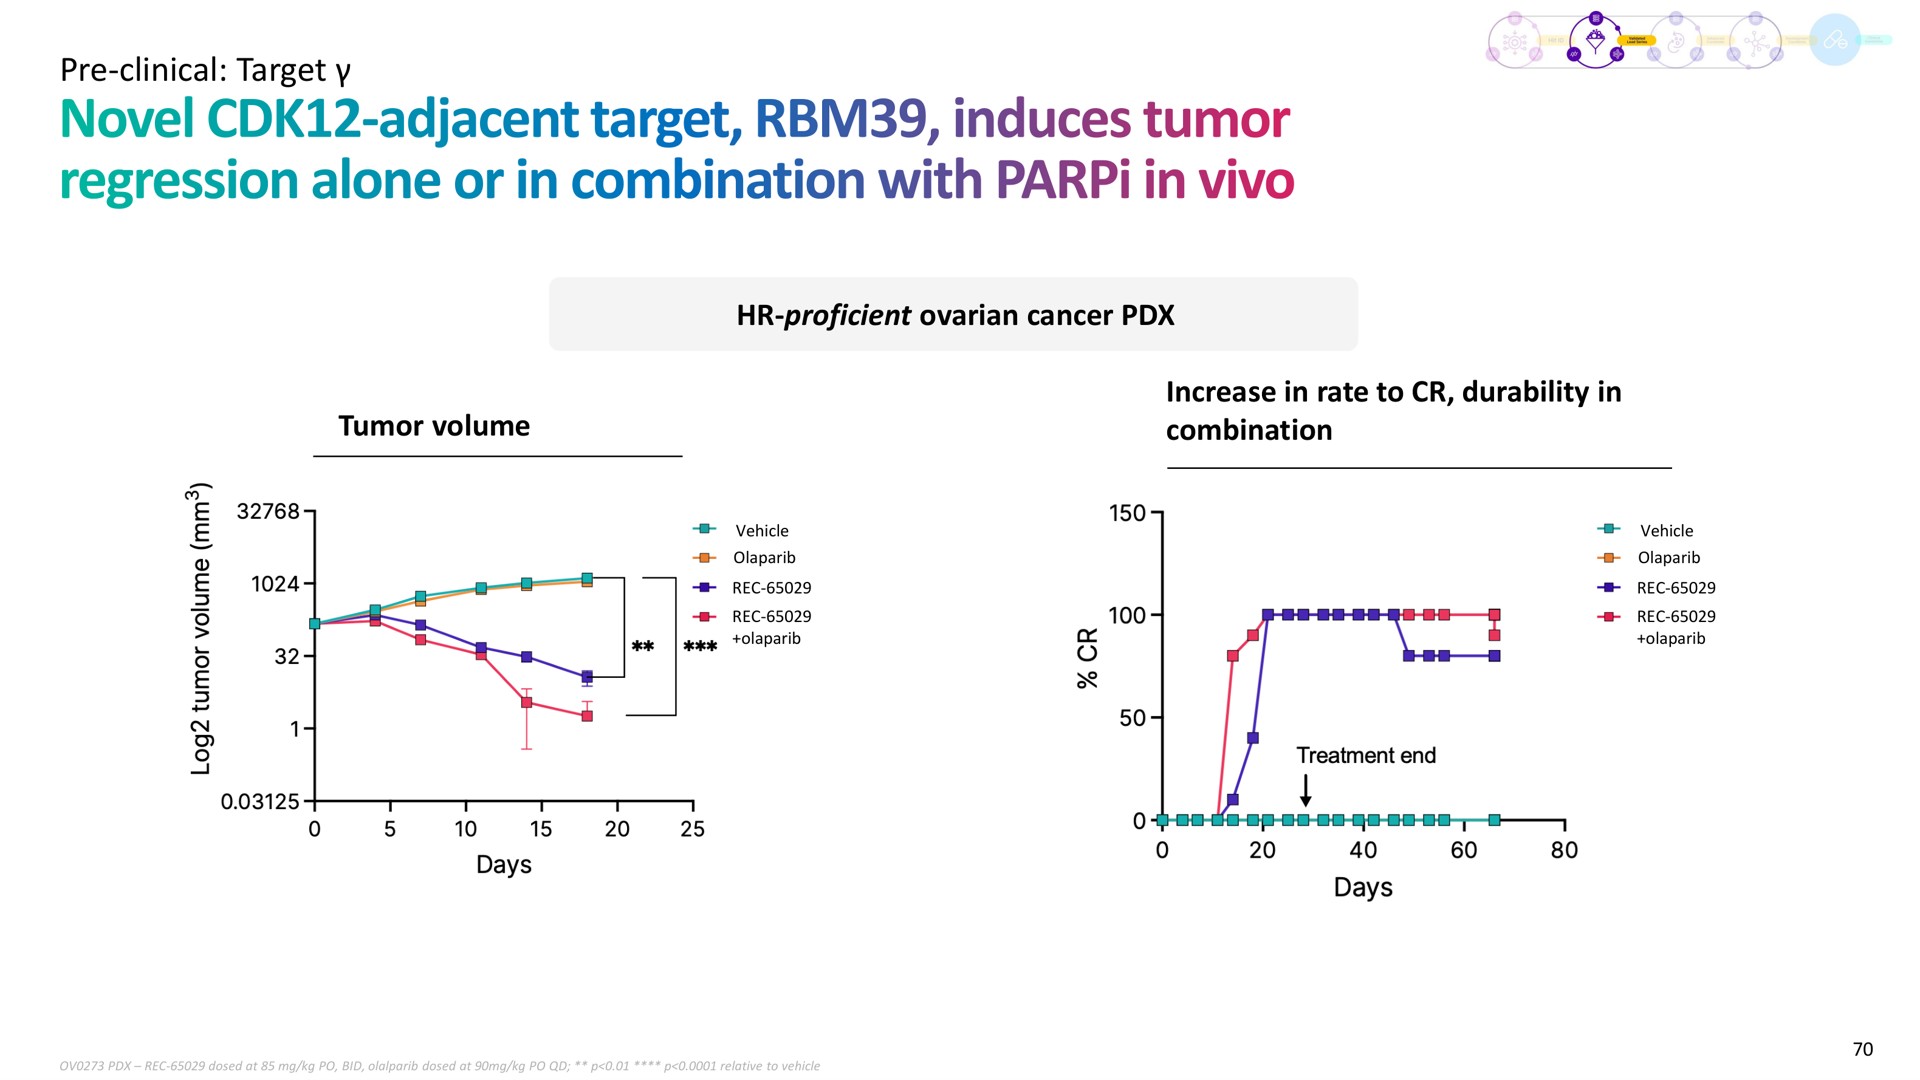 clinical target proficient ovarian cancer tumor volume increase in rate to durability in combination novel adjacent induces regression alone or with | Recursion Pharmaceuticals